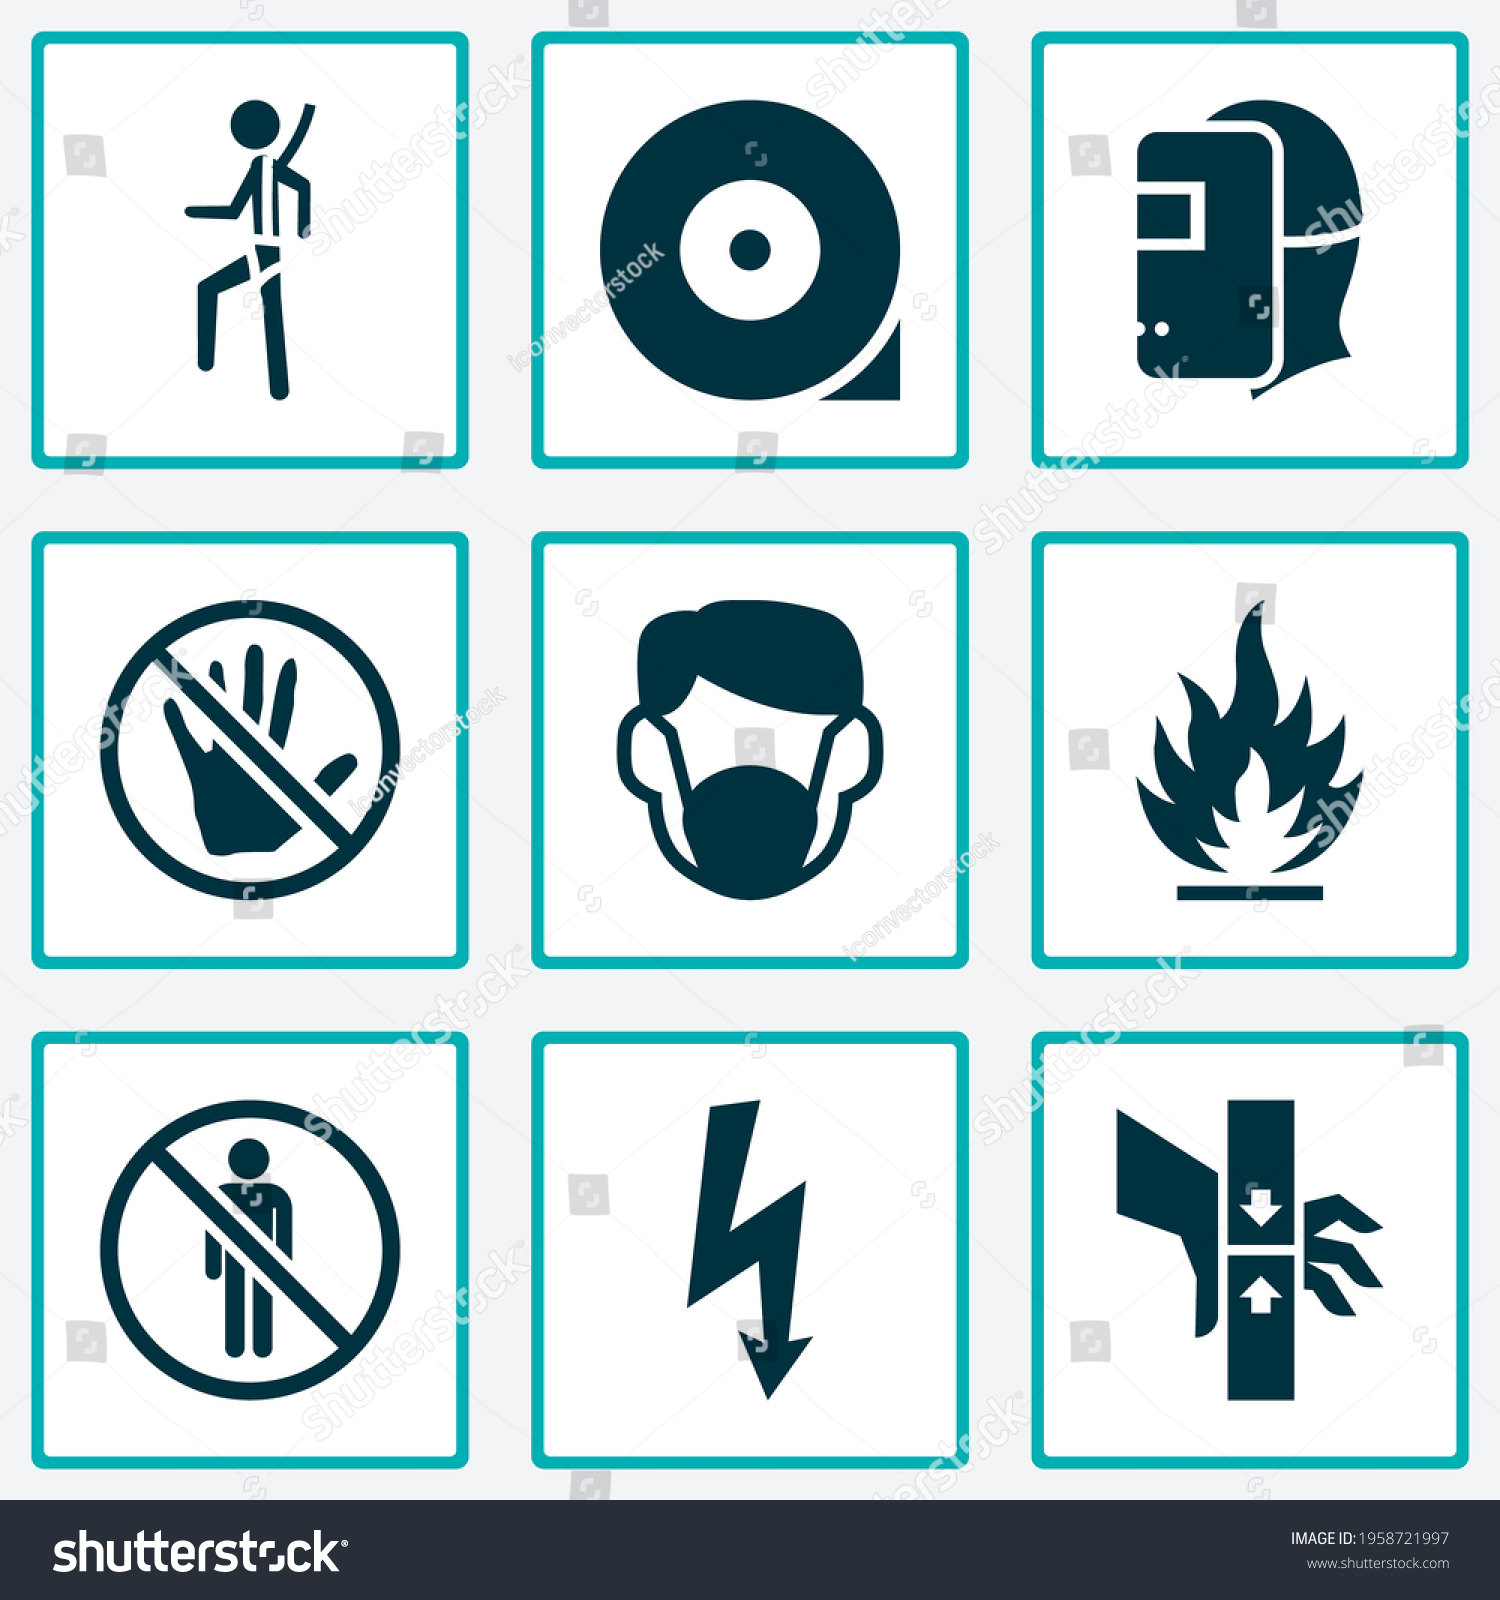 SVG of Safety icons set with chocked wheel, dust mask, electrical hazard and other fire elements. Isolated vector illustration safety icons. svg